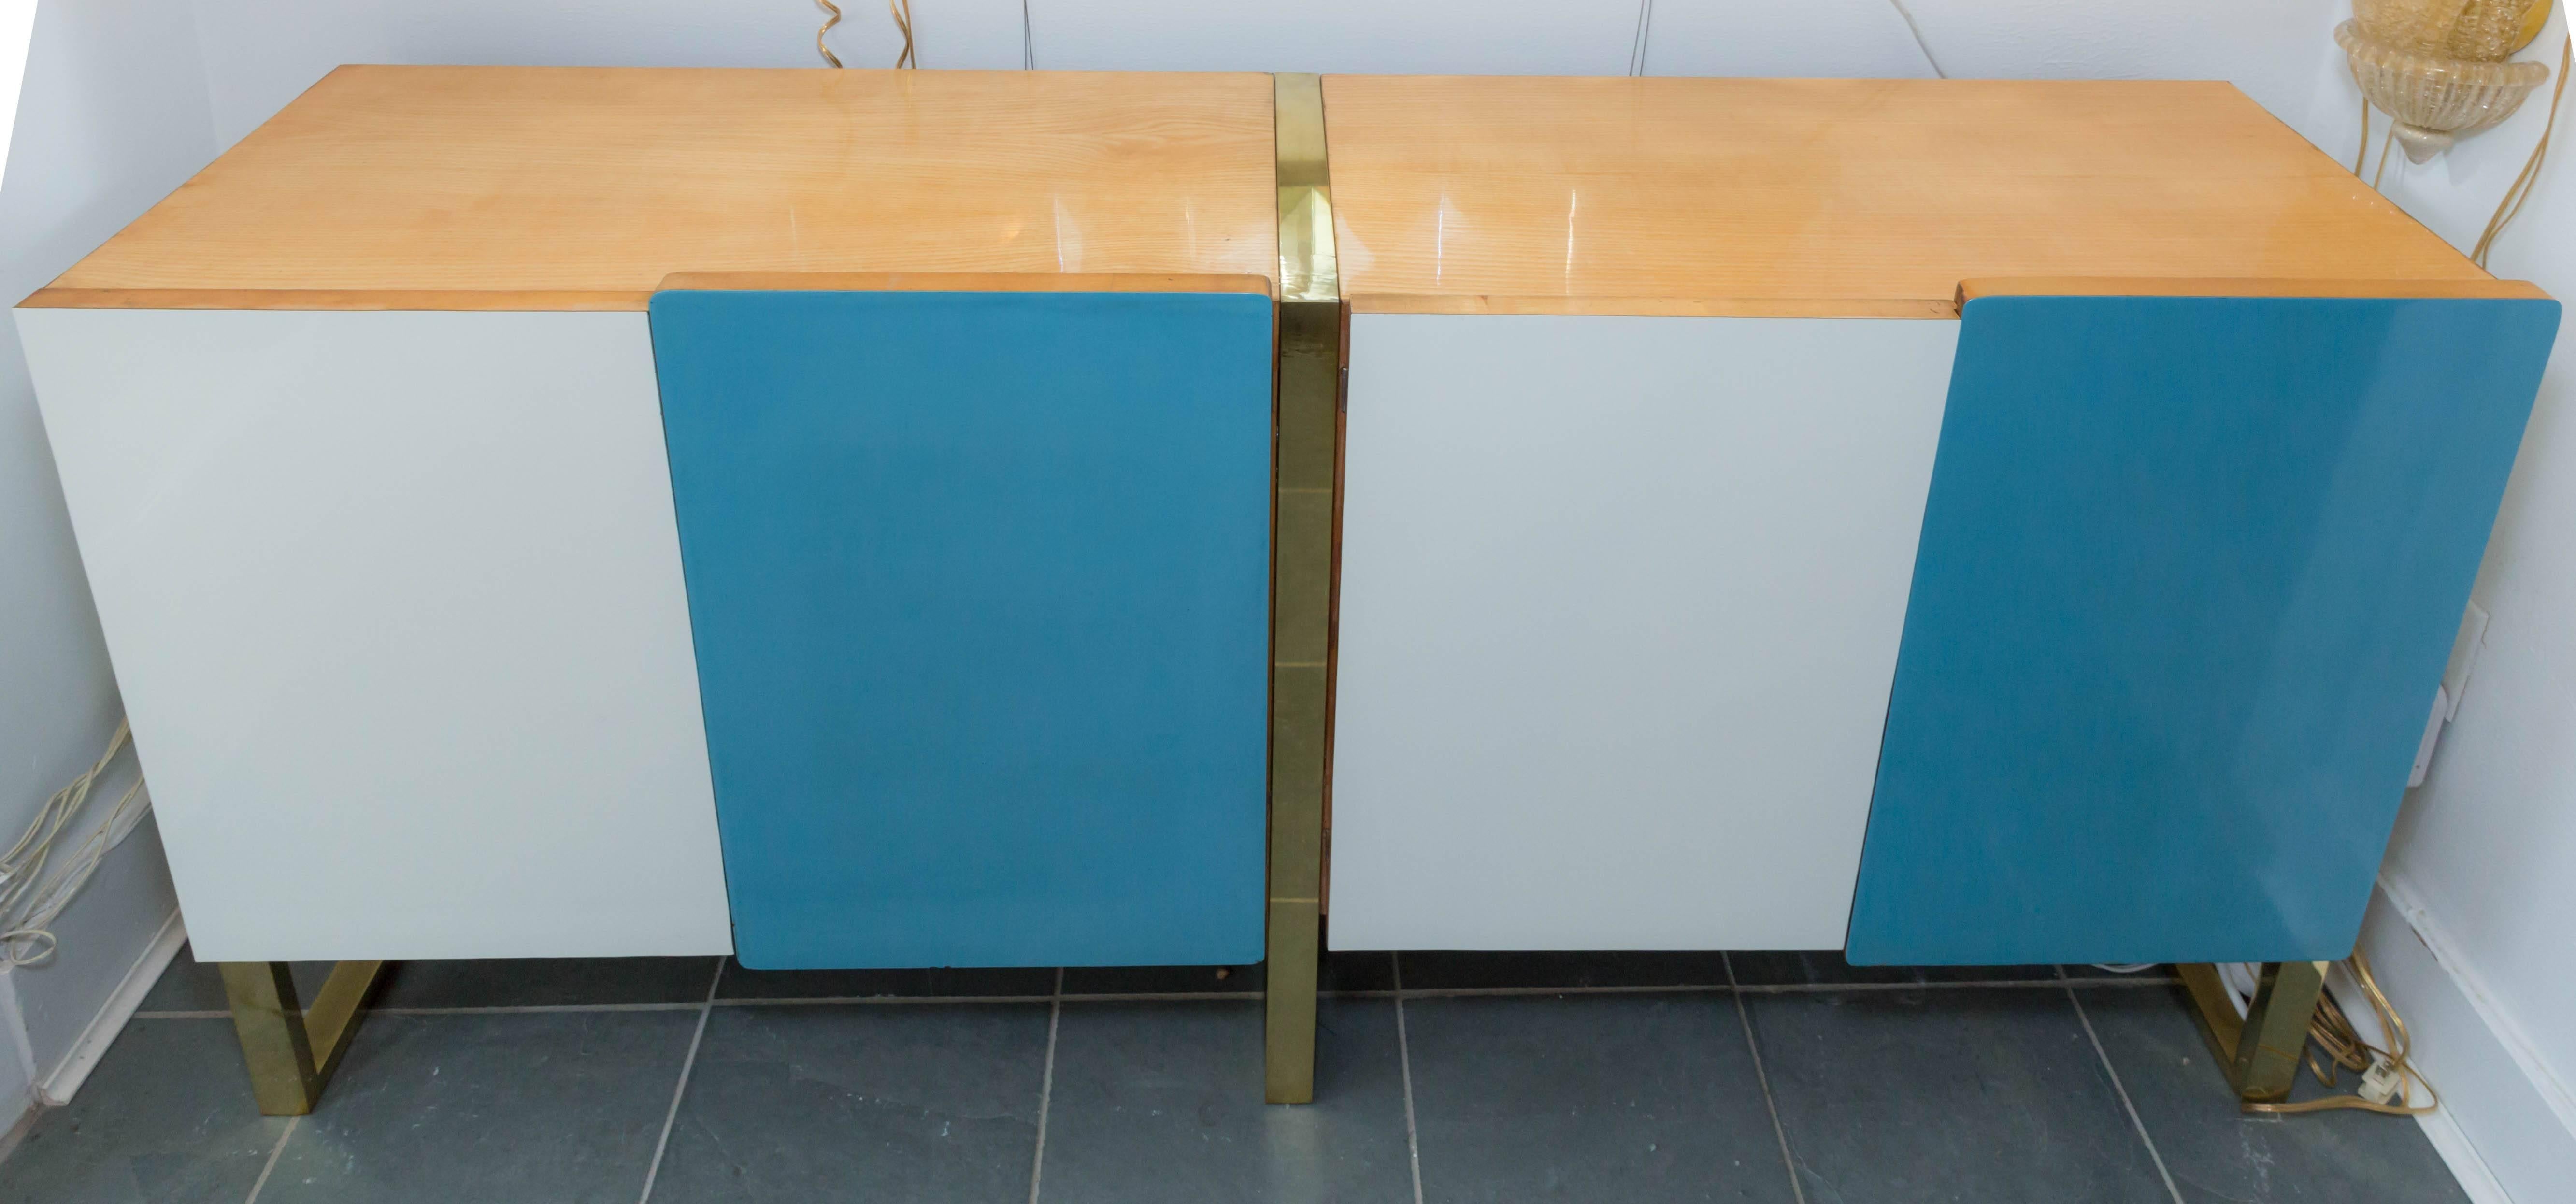 Light wood cabinet with blue and white front door and brass detail in the style of Gio Ponti.